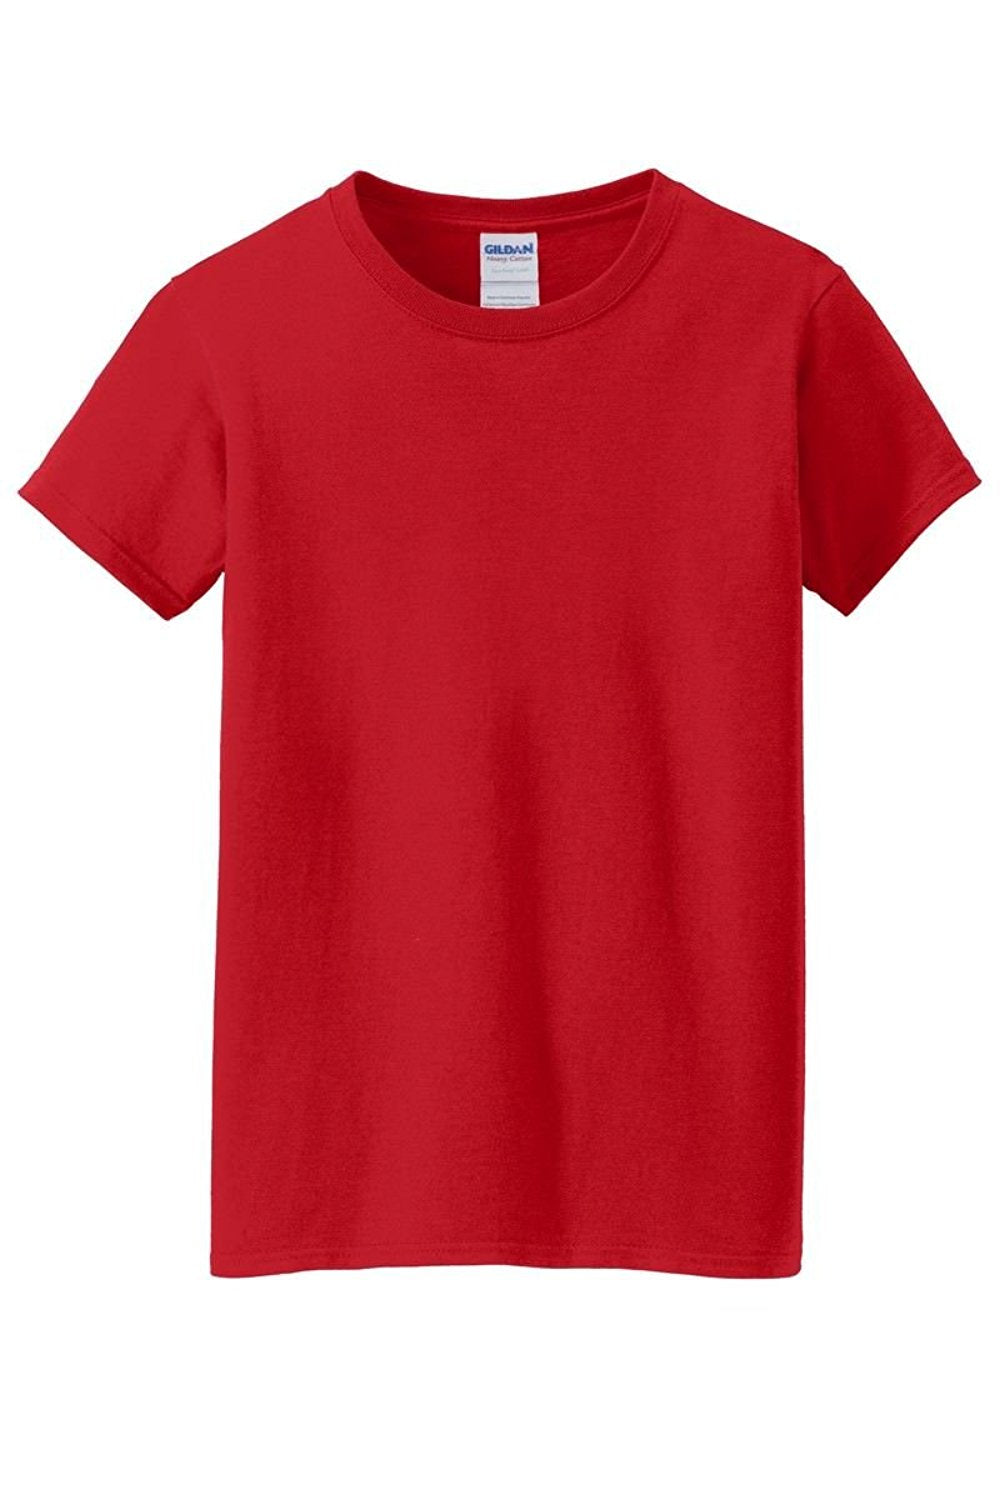 red t shirt blank